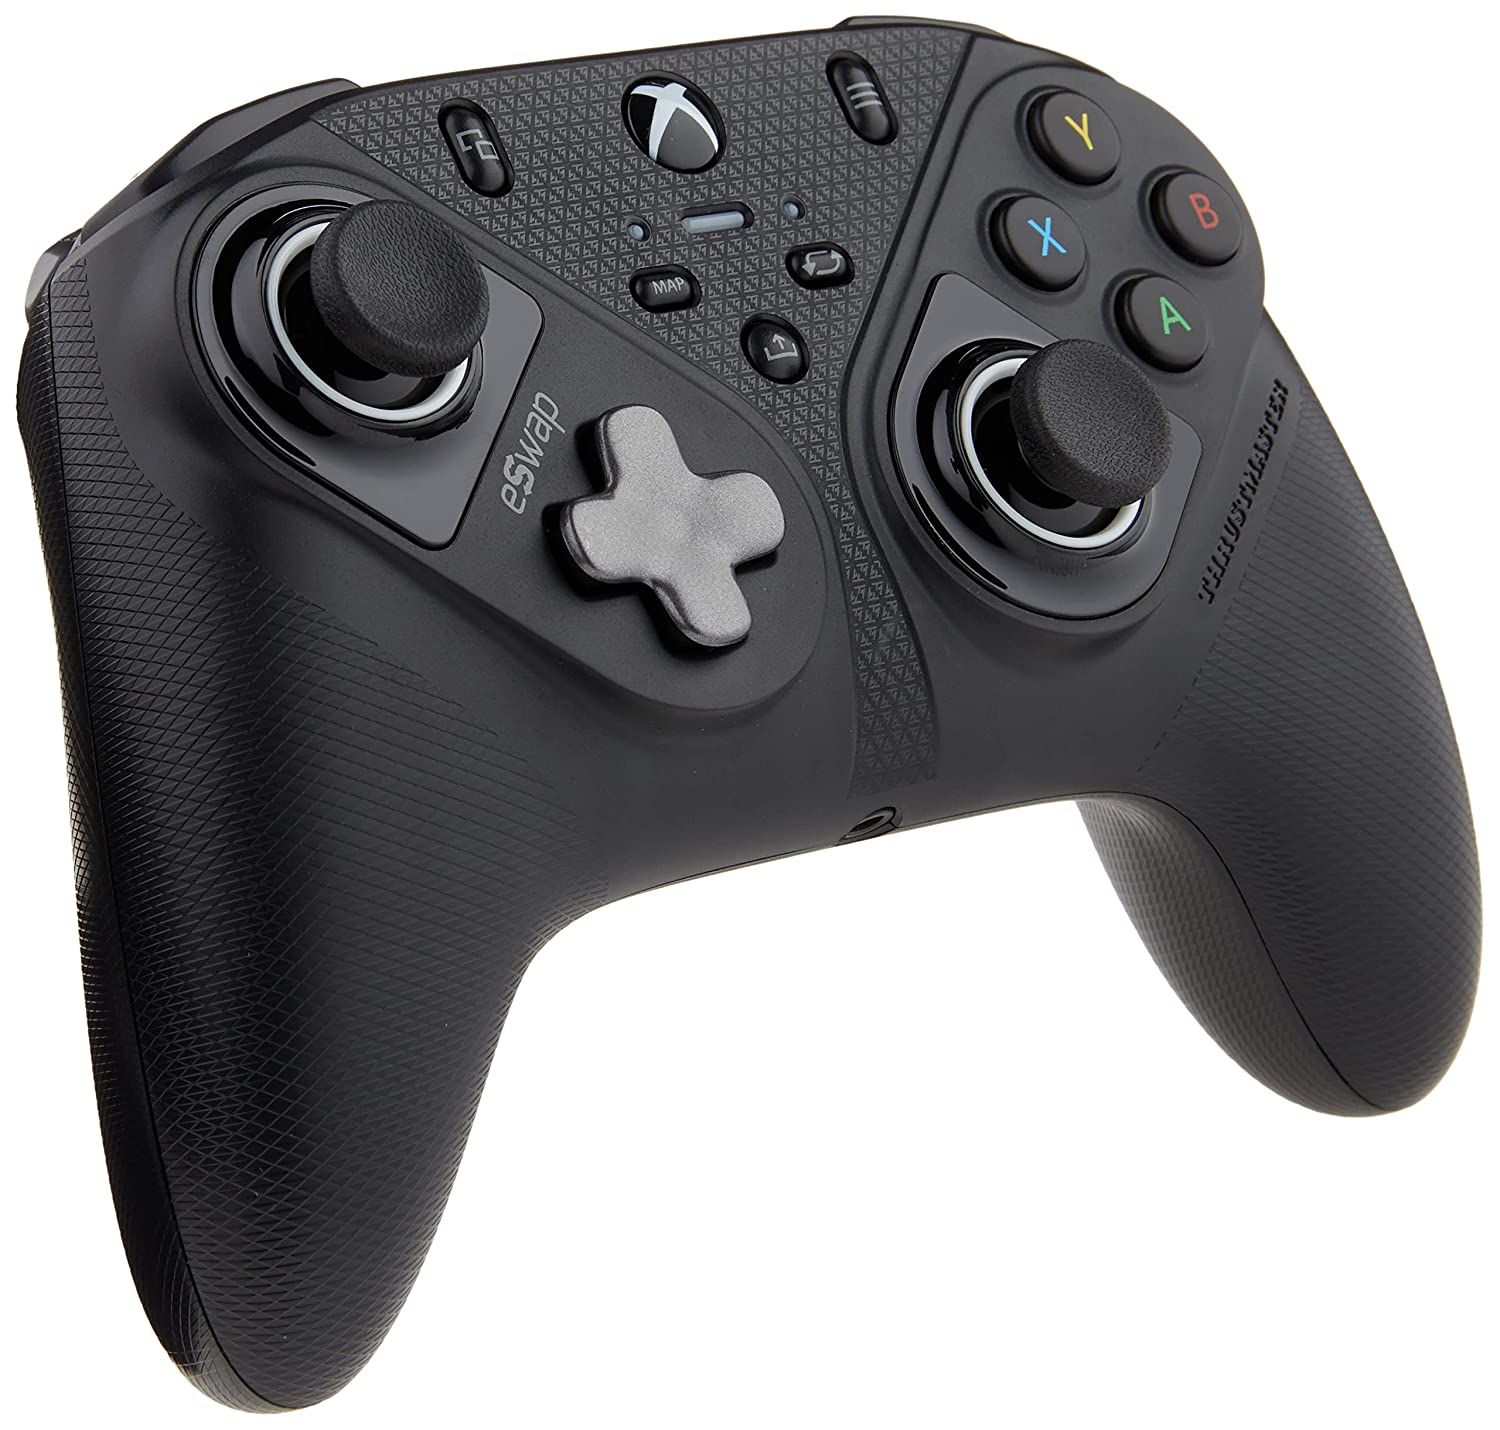 My search for the ultimate PC gaming controller is over